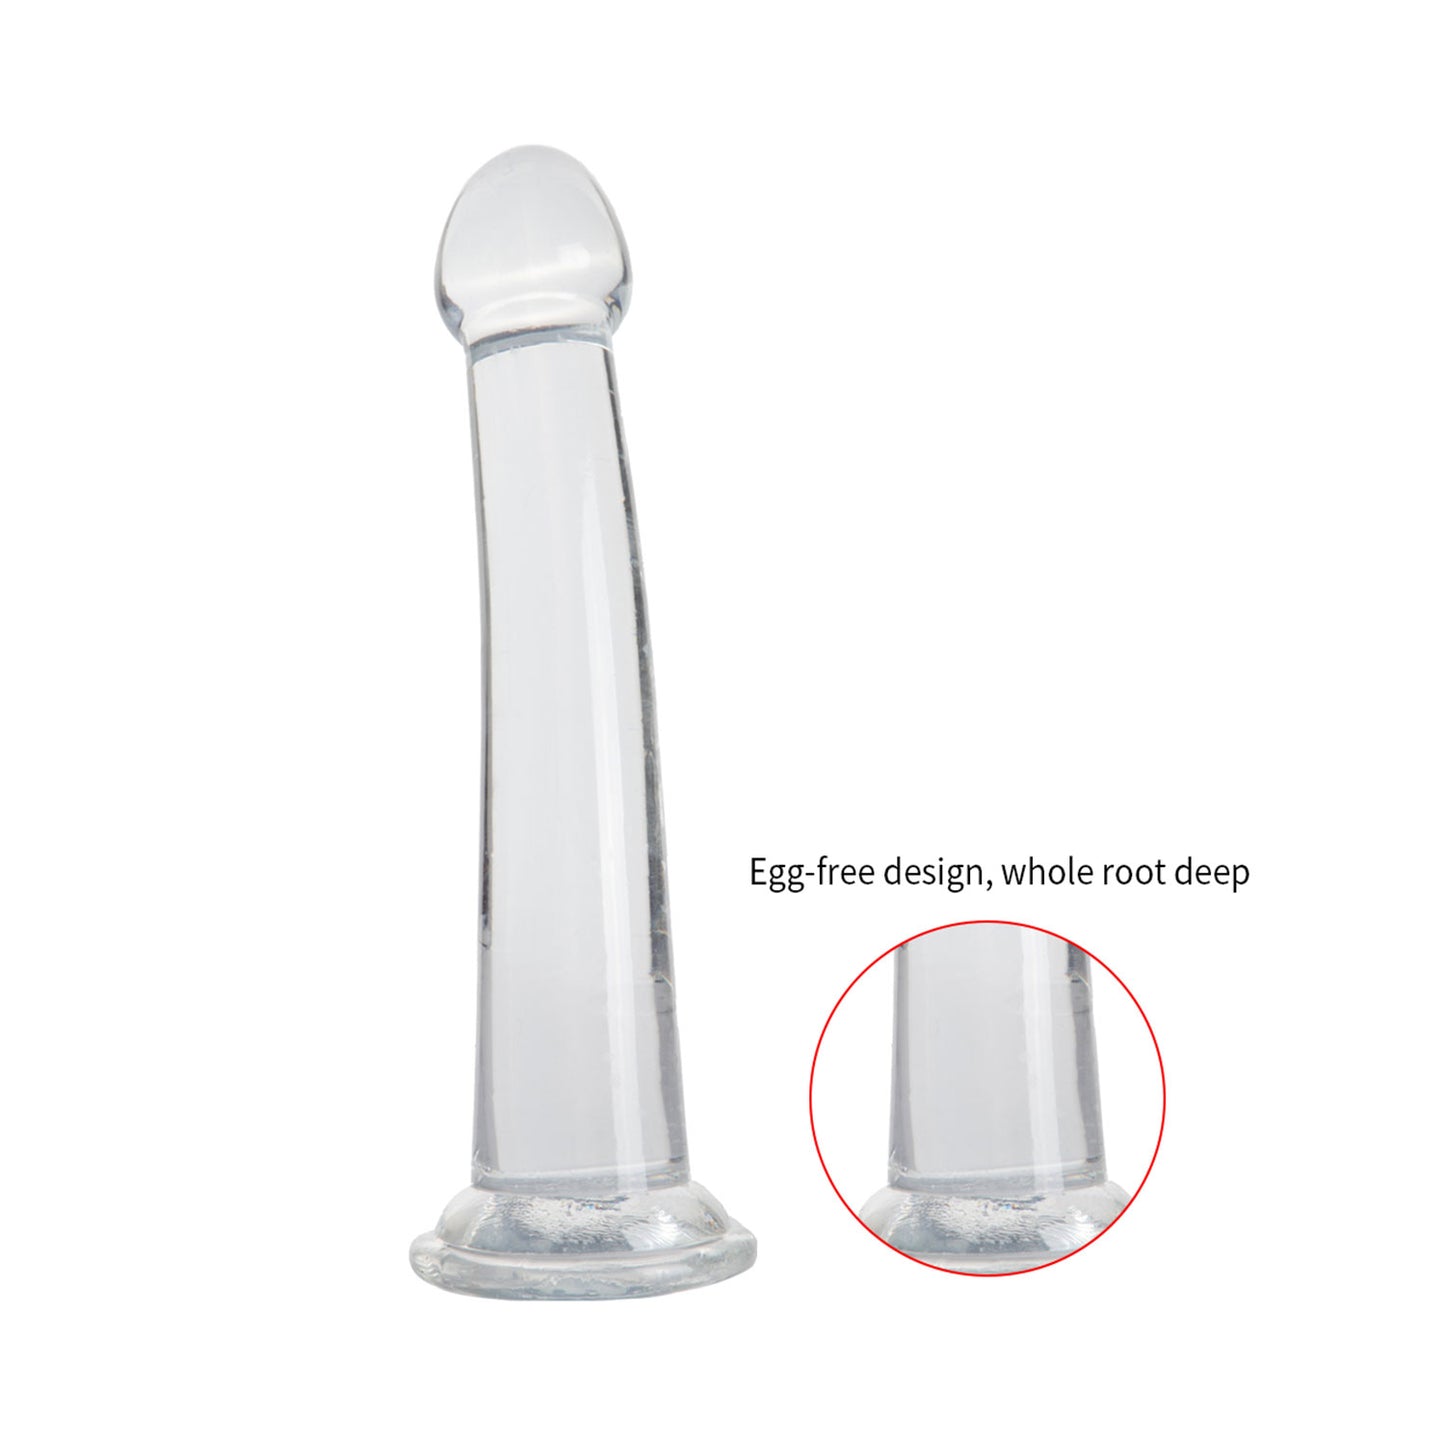 The Horny Company - No Frills Dildo 21cm x 3.6cm Smooth Suction Cup Dong Clear